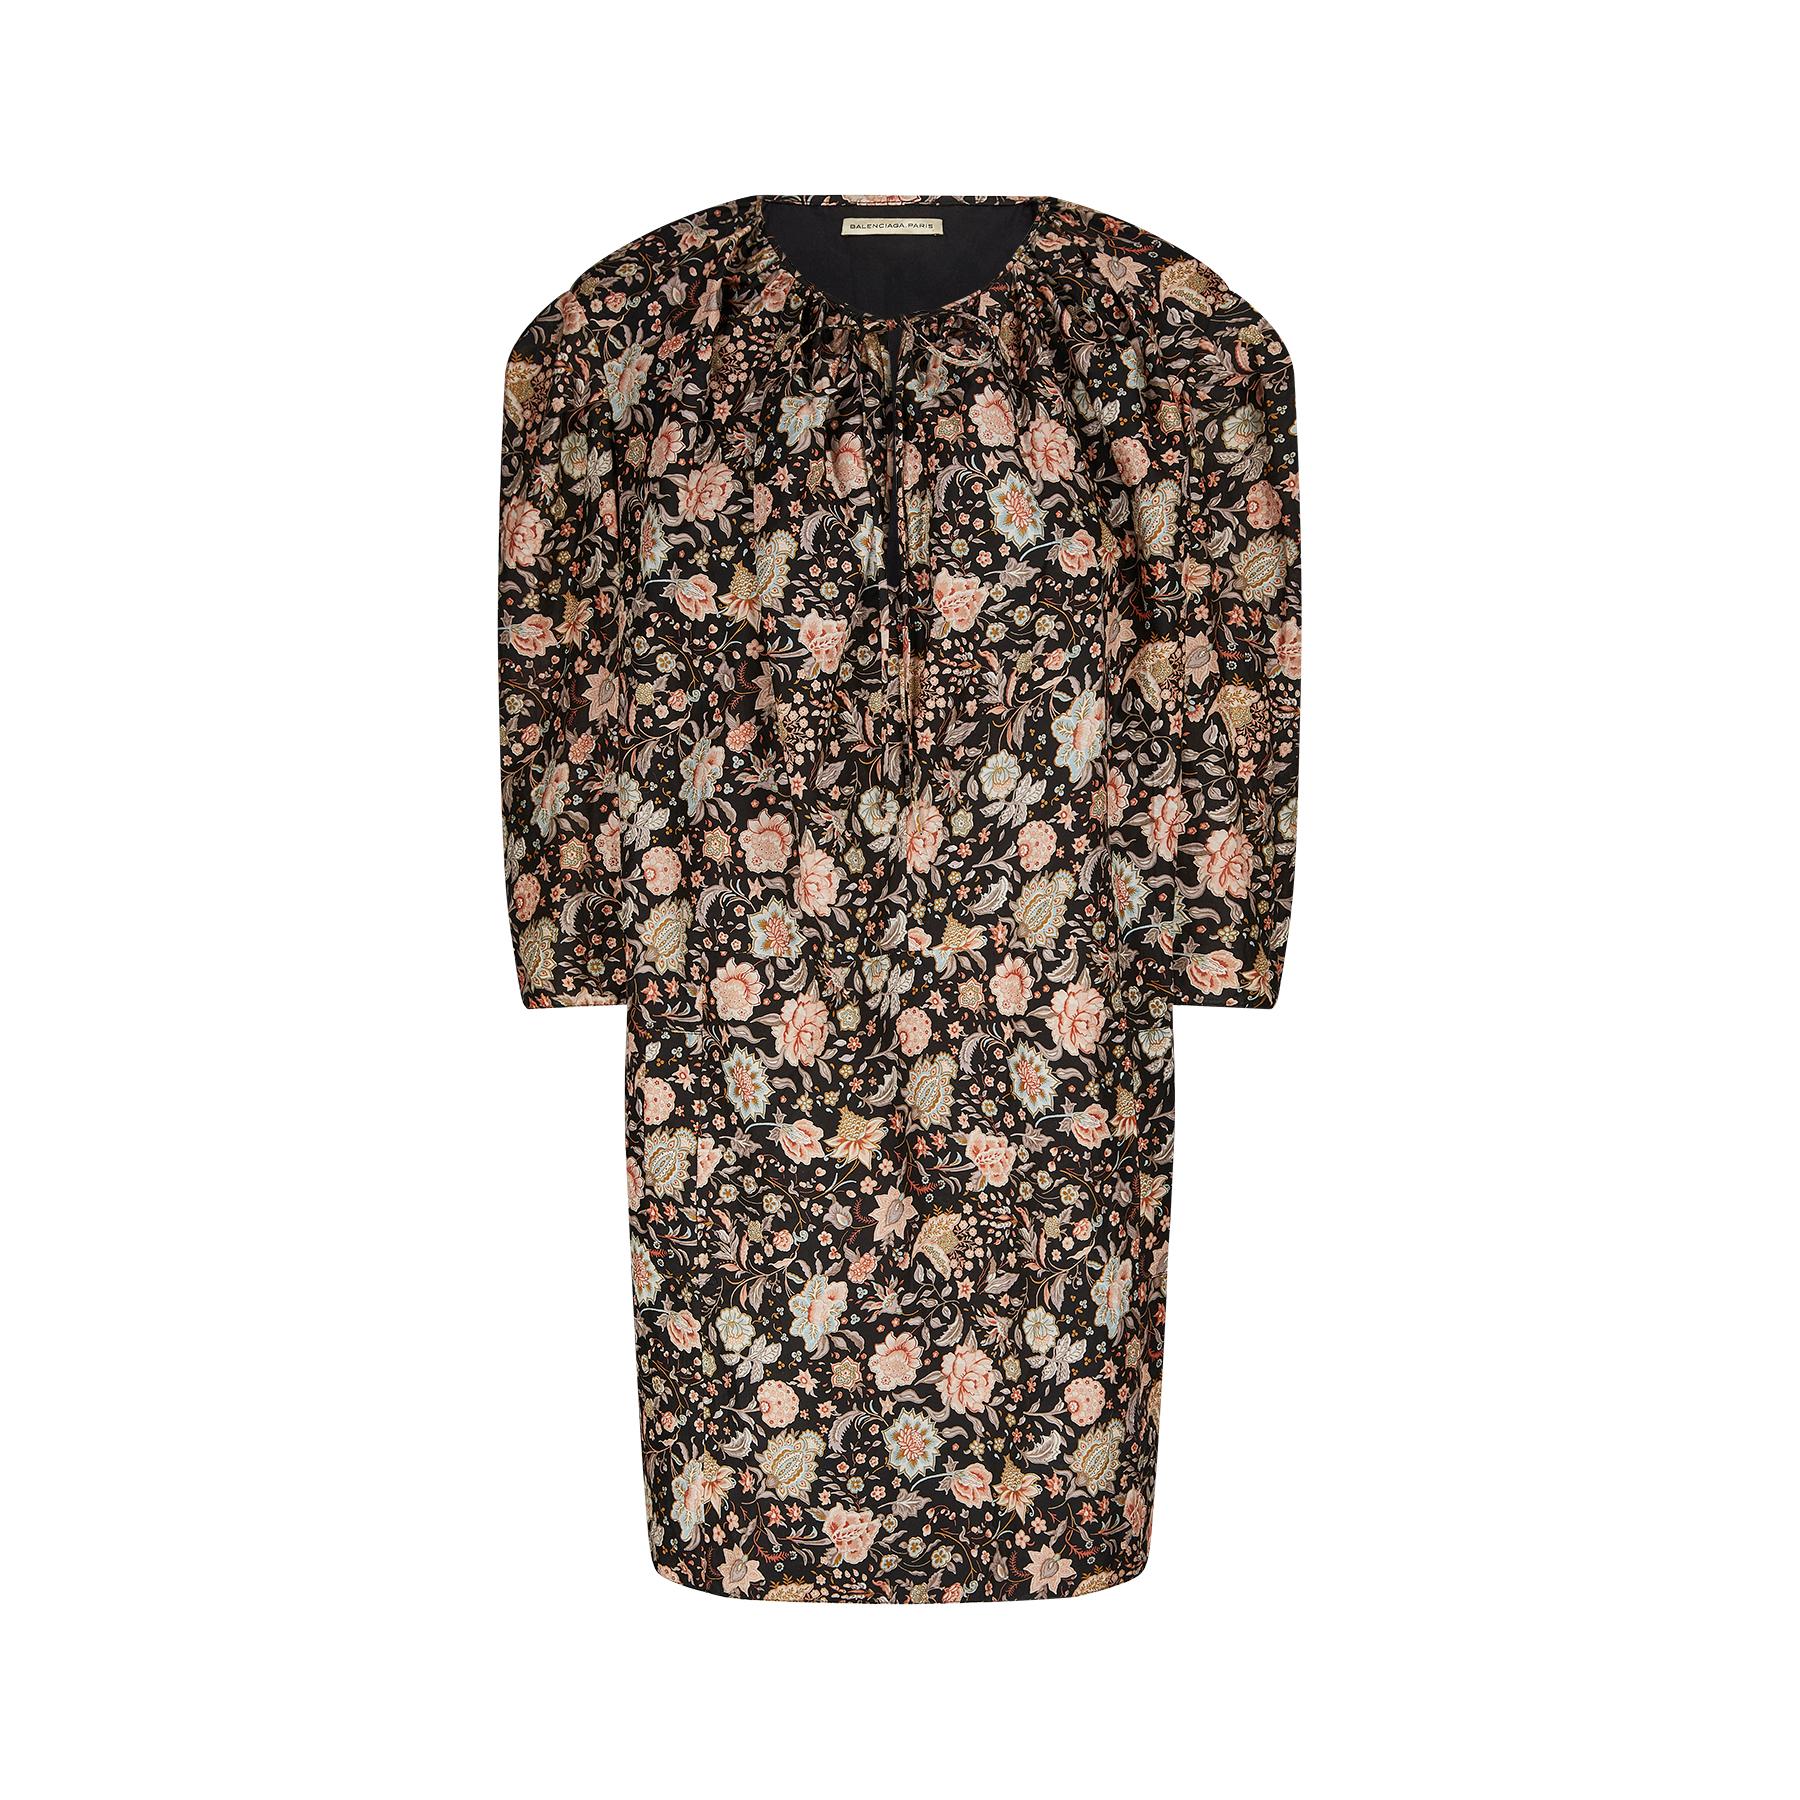 Nicolas Ghesquiere for Balenciaga floral cotton dress with date label 2010.  The dress is a tunic style in an antique look print featuring a floral and leaf arrangement in muted orange and beige tones against a smoky black background. This has